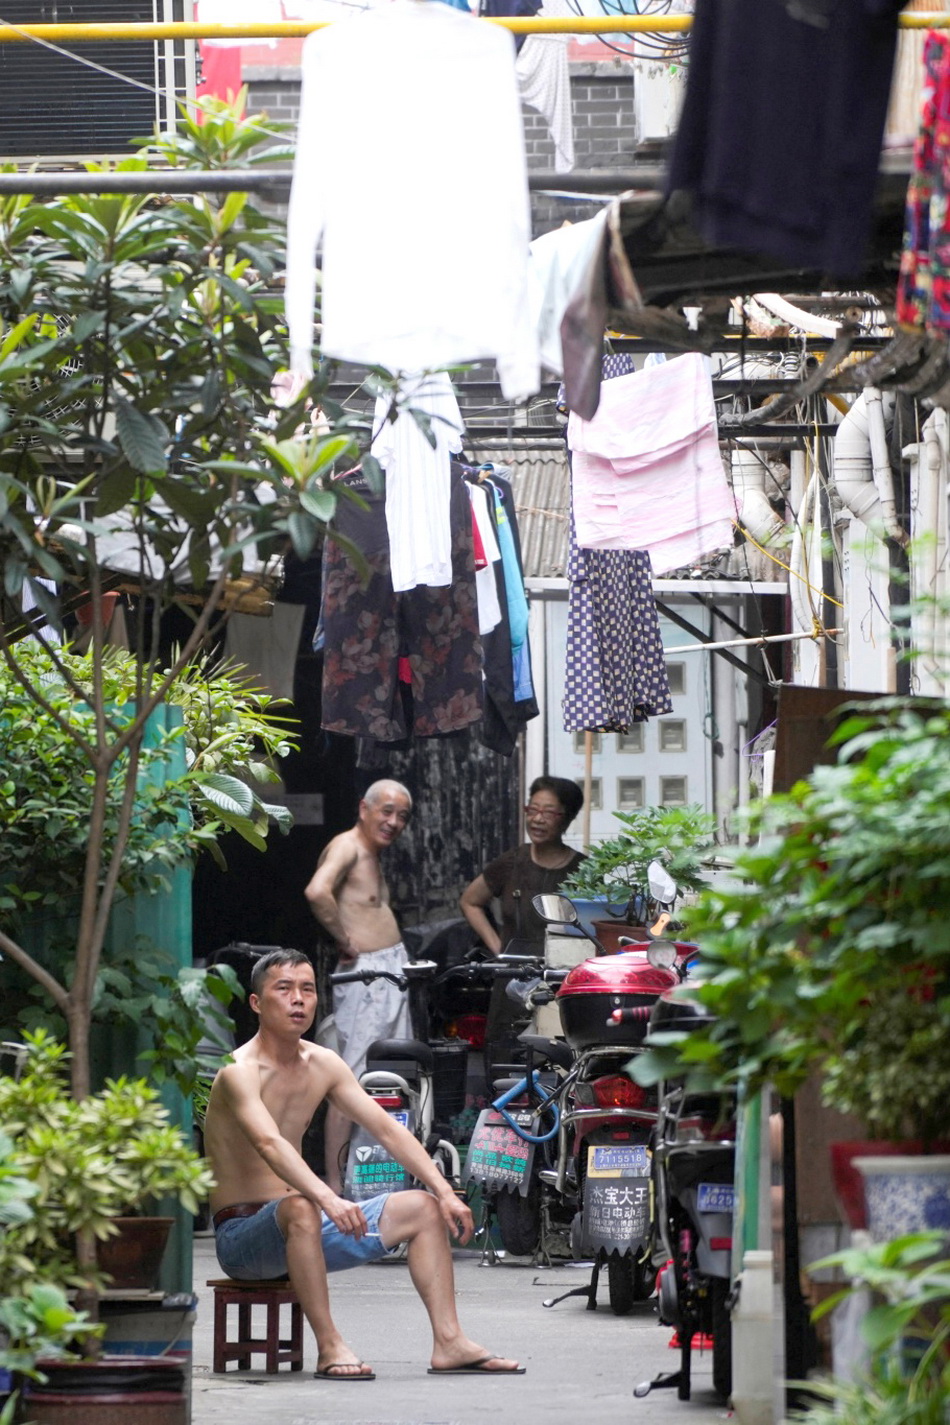 Topless men are seen at a residential area amid a heatwave warning in Shanghai, China July 25, 2022.7123815790356693004.jpg